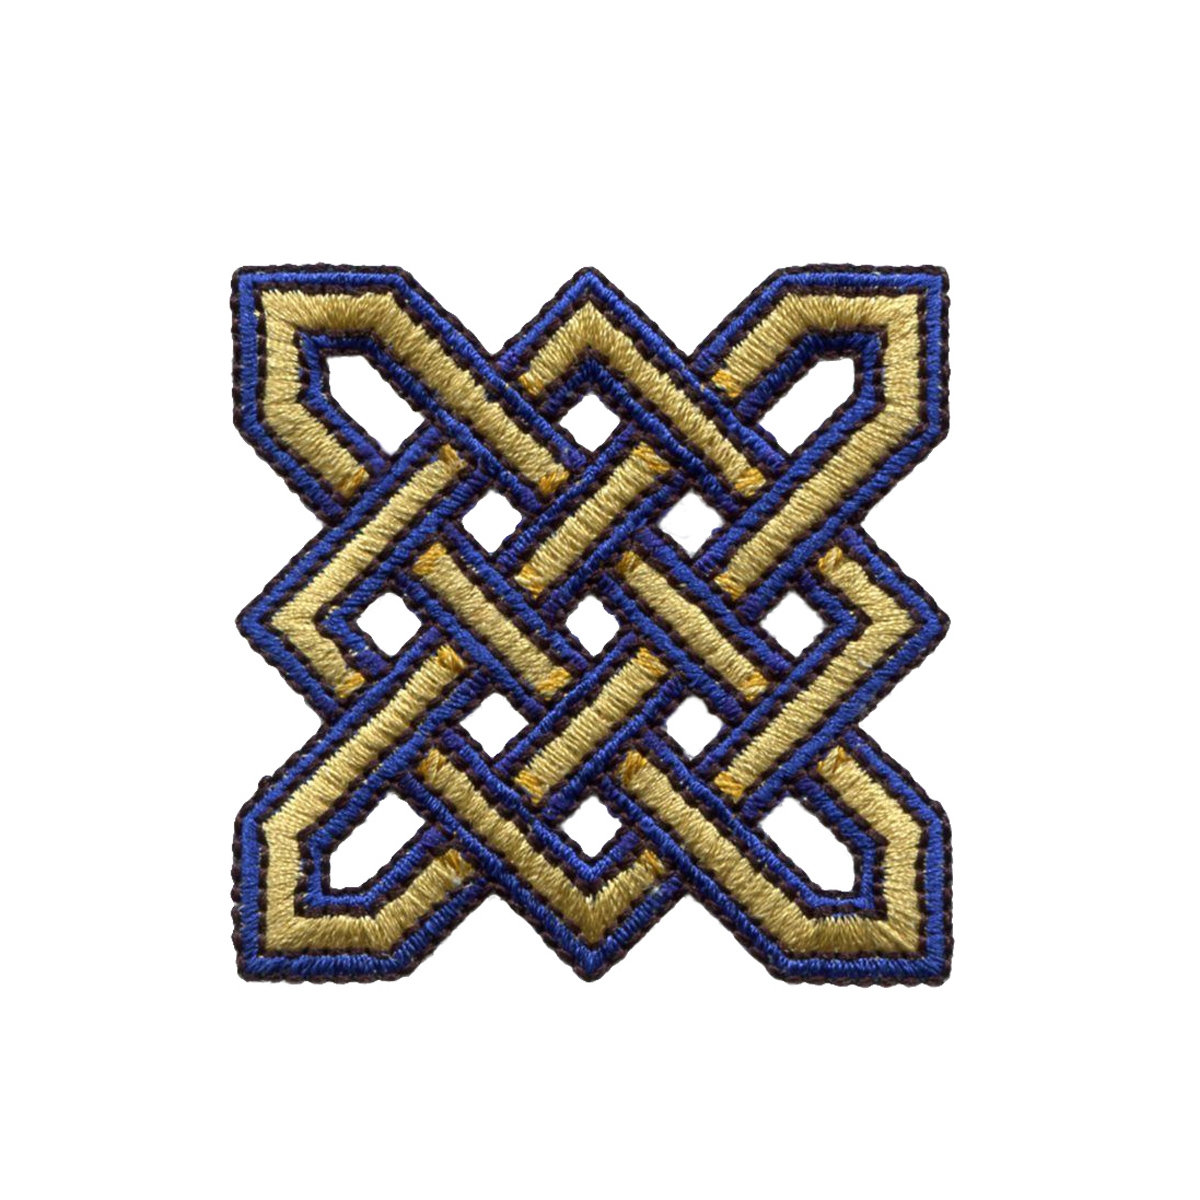 Celtic Embroidery Patterns Square Celtic Knot Embroidery Design